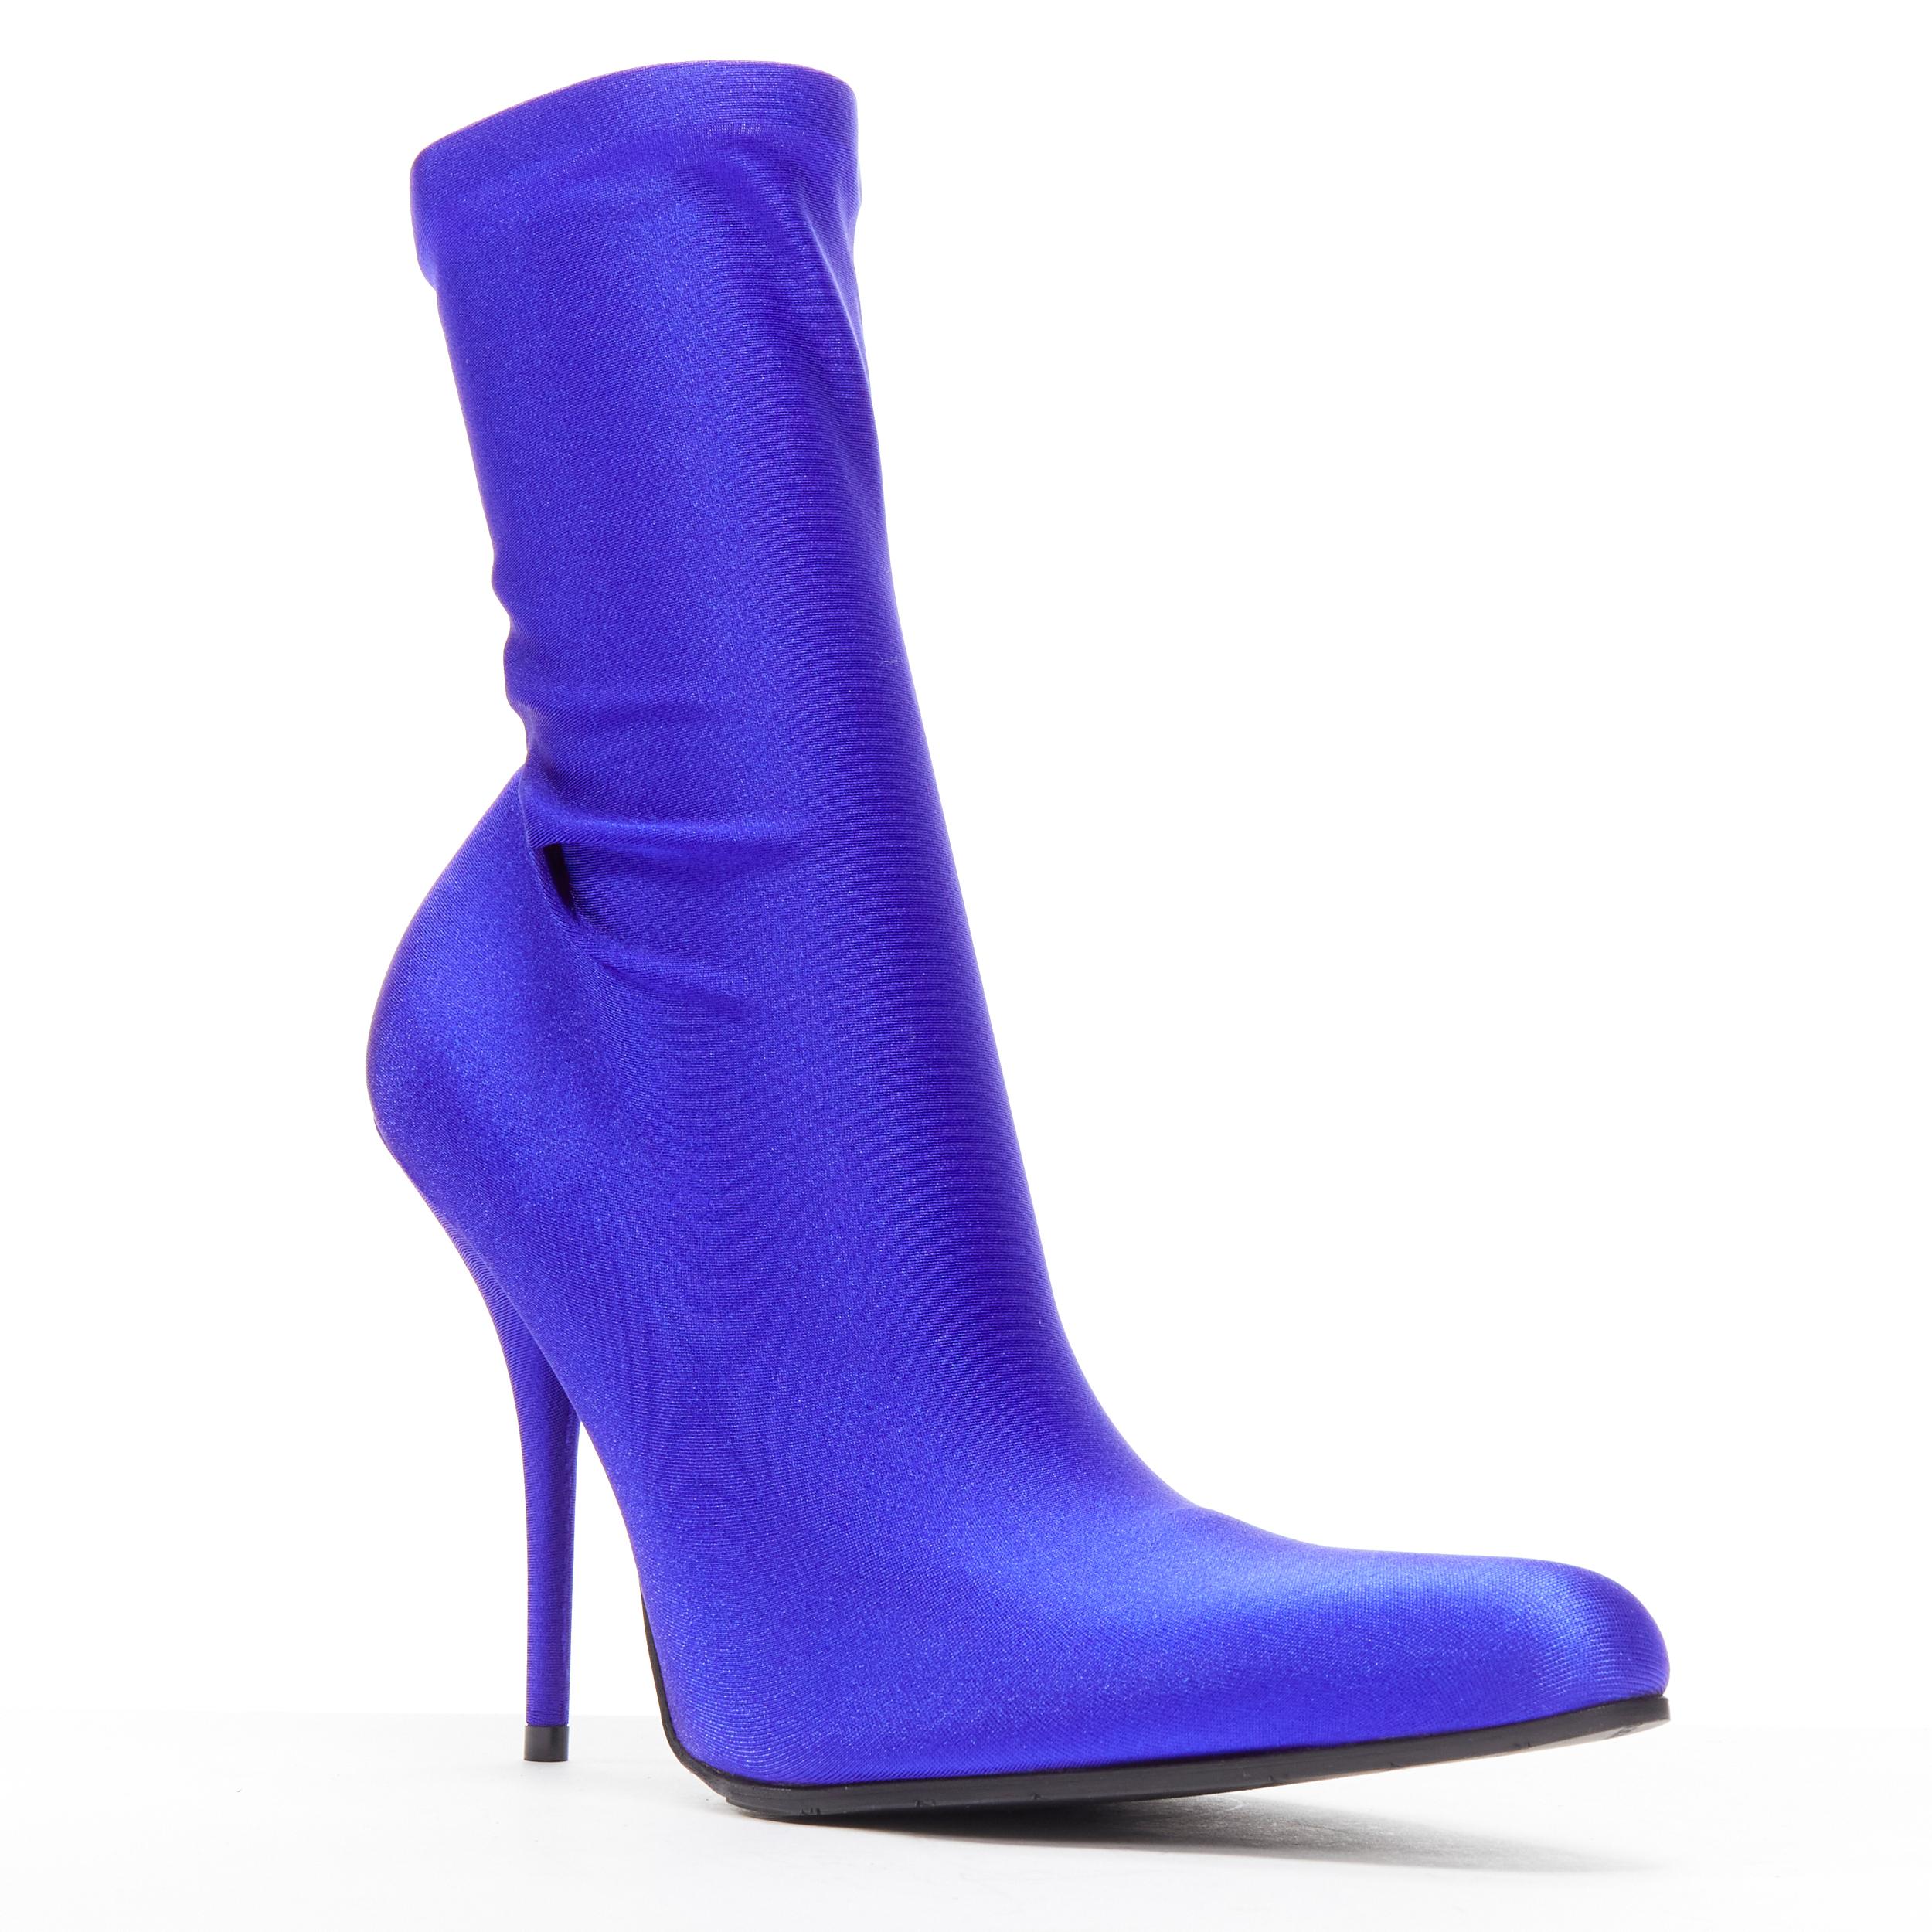 new BALENCIAGA Demna blue lycra high heeled sock boots EU36 Kim Kardashian
Reference: TGAS/D00192
Brand: Balenciaga
Designer: Demna
Model: Sock boot
Material: Jersey
Color: Blue
Pattern: Solid
Closure: Stretchy
Lining: Black Leather
Extra Details: